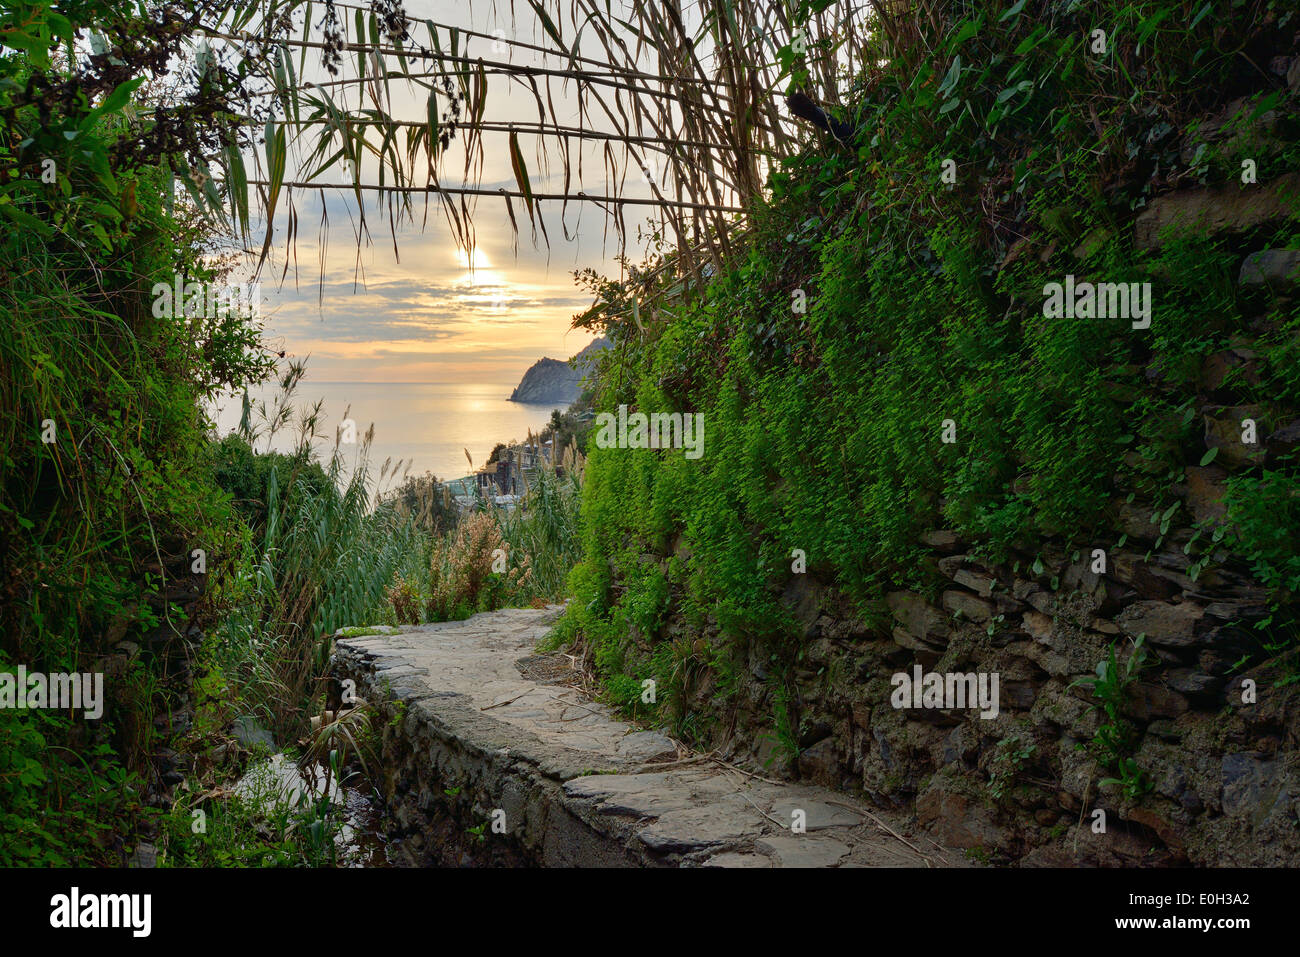 Path bypassing a dry stone wall with view towards the sea, Cinque Terre, National Park Cinque Terre, UNESCO World Heritage Site Stock Photo